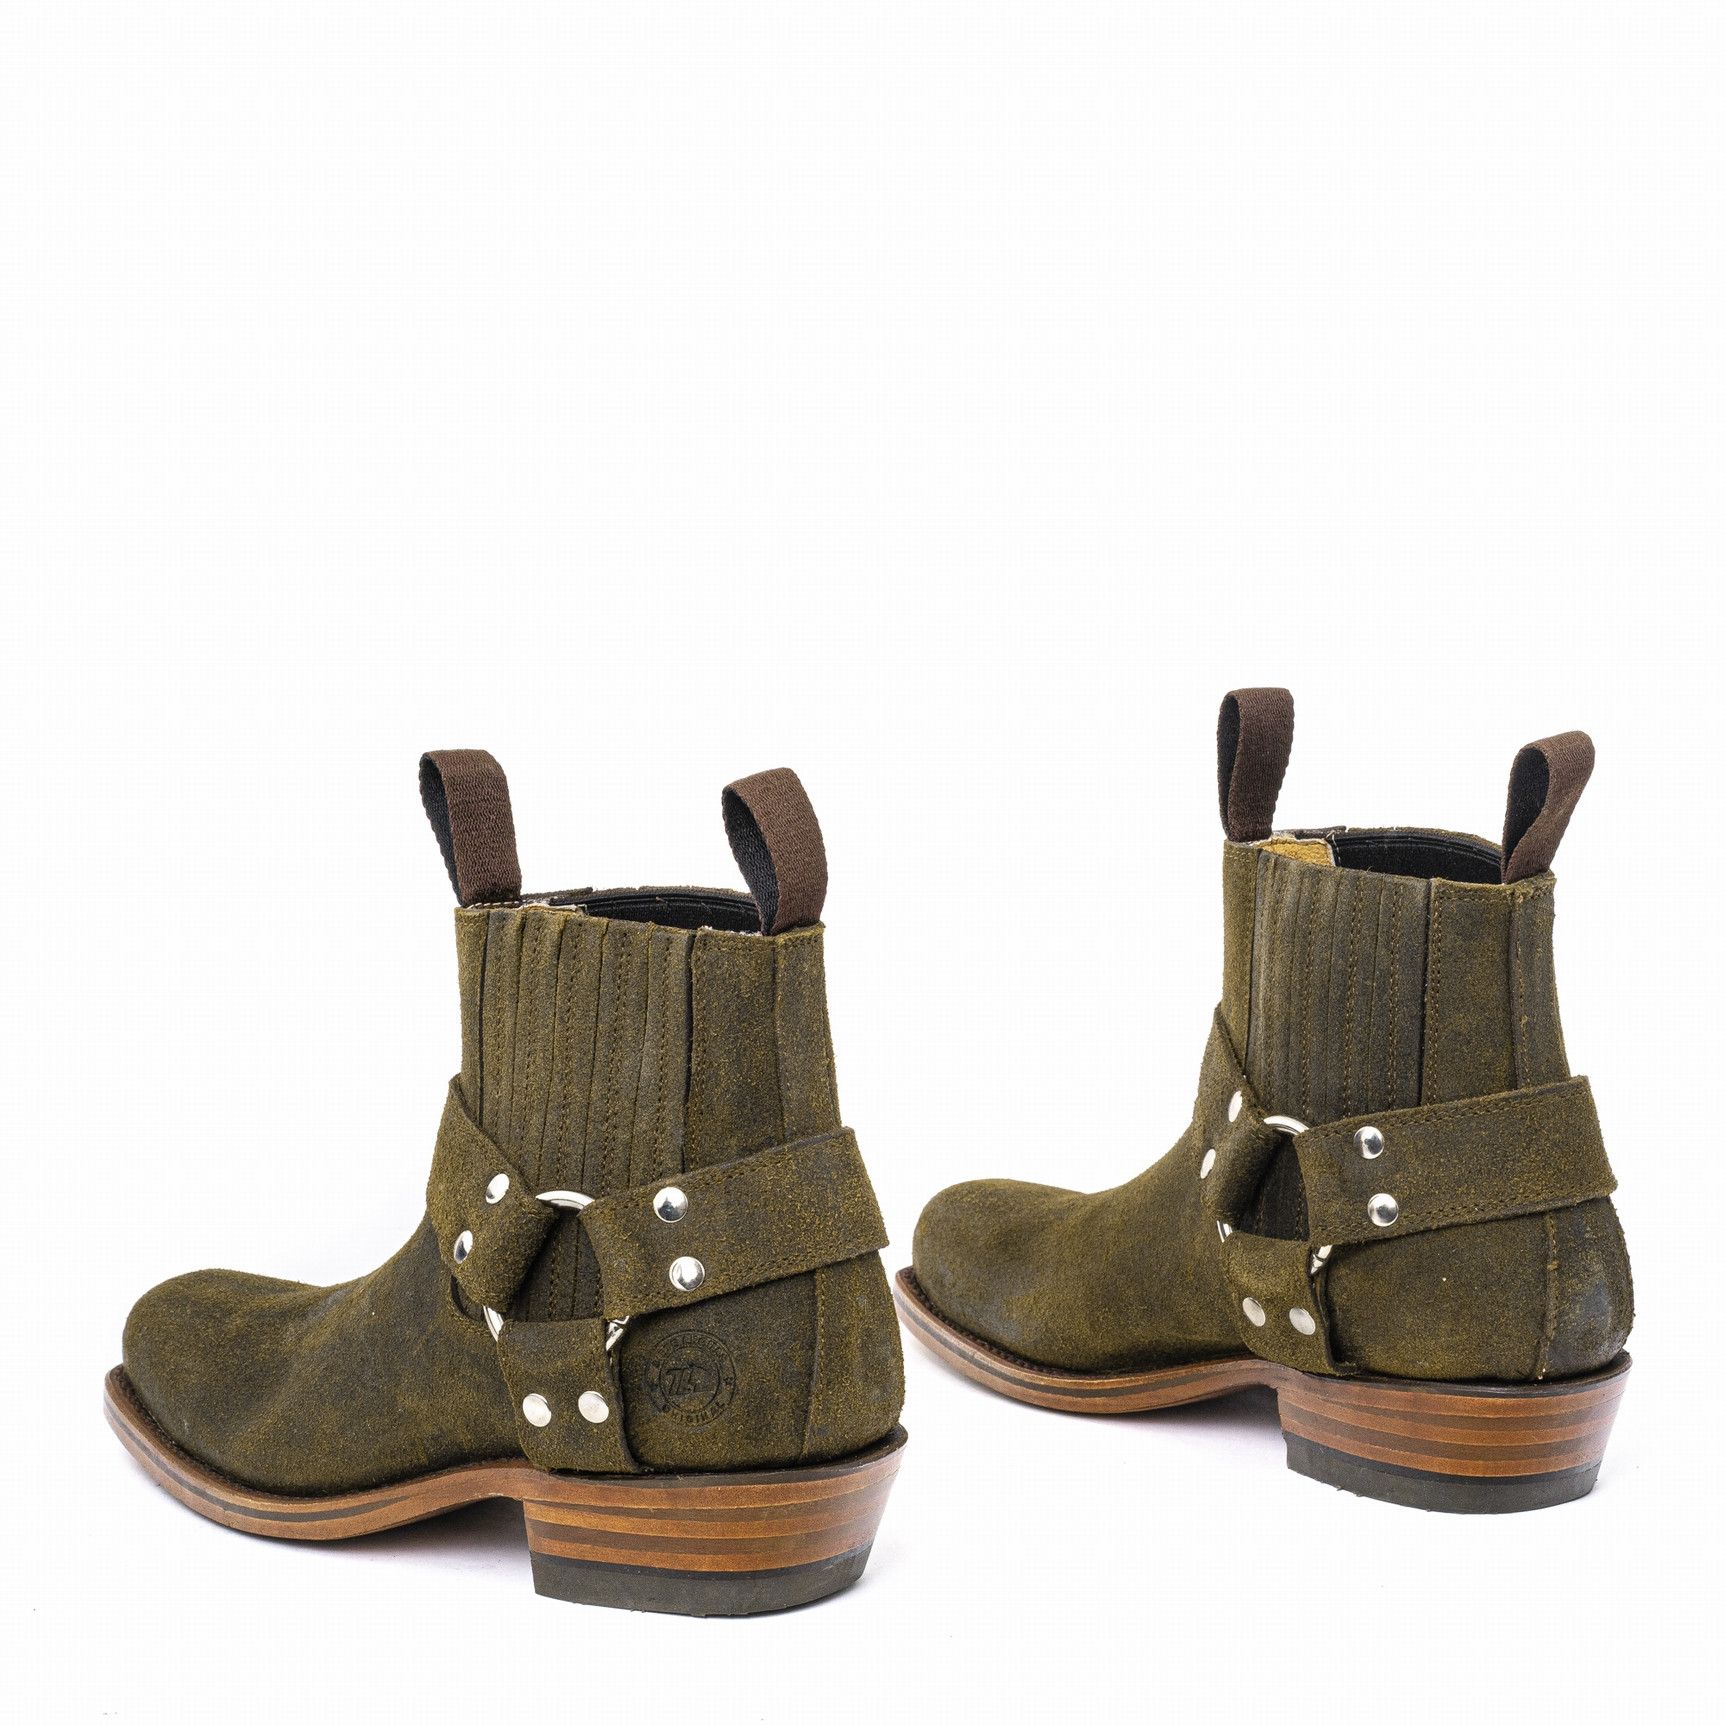 TOLTECA BOOTS DARK OLIVE THIS STYLE RUNS SMALL, ORDER 1 SIZE UP THAN YOUR USUAL SIZE        SQUARE TOE BOOTIES WITH LEATHER STRA